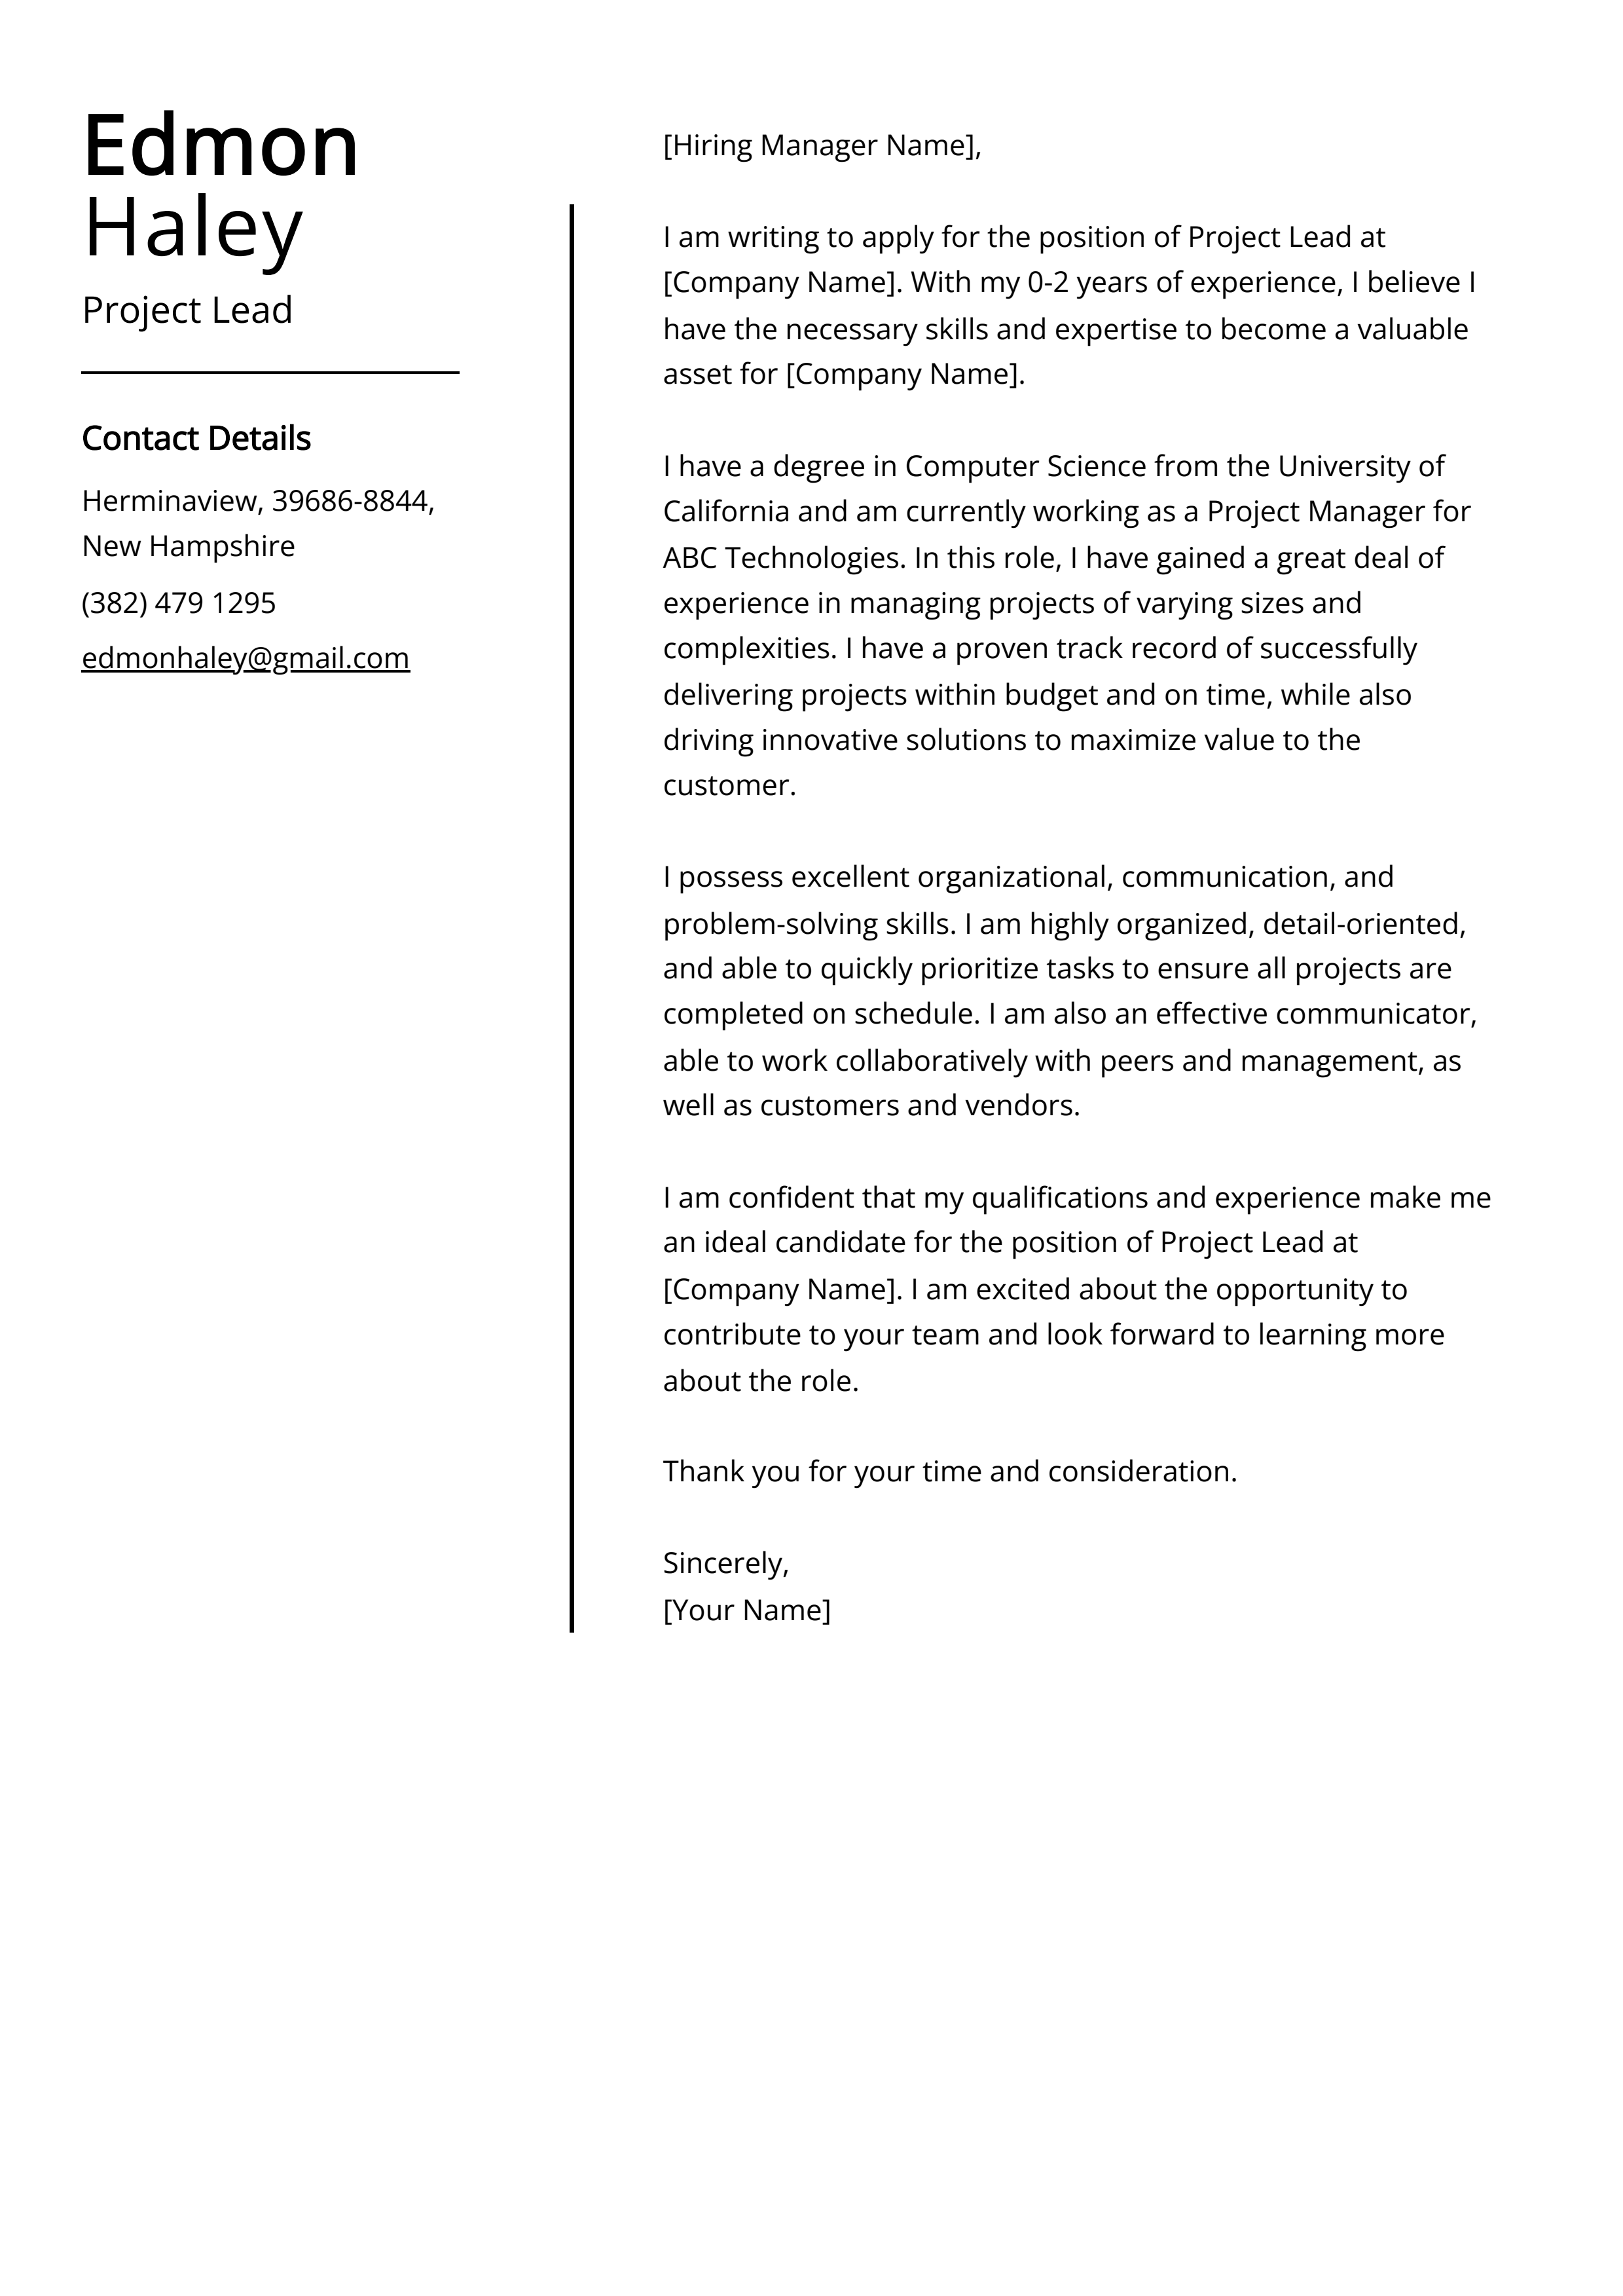 Project Lead Cover Letter Example